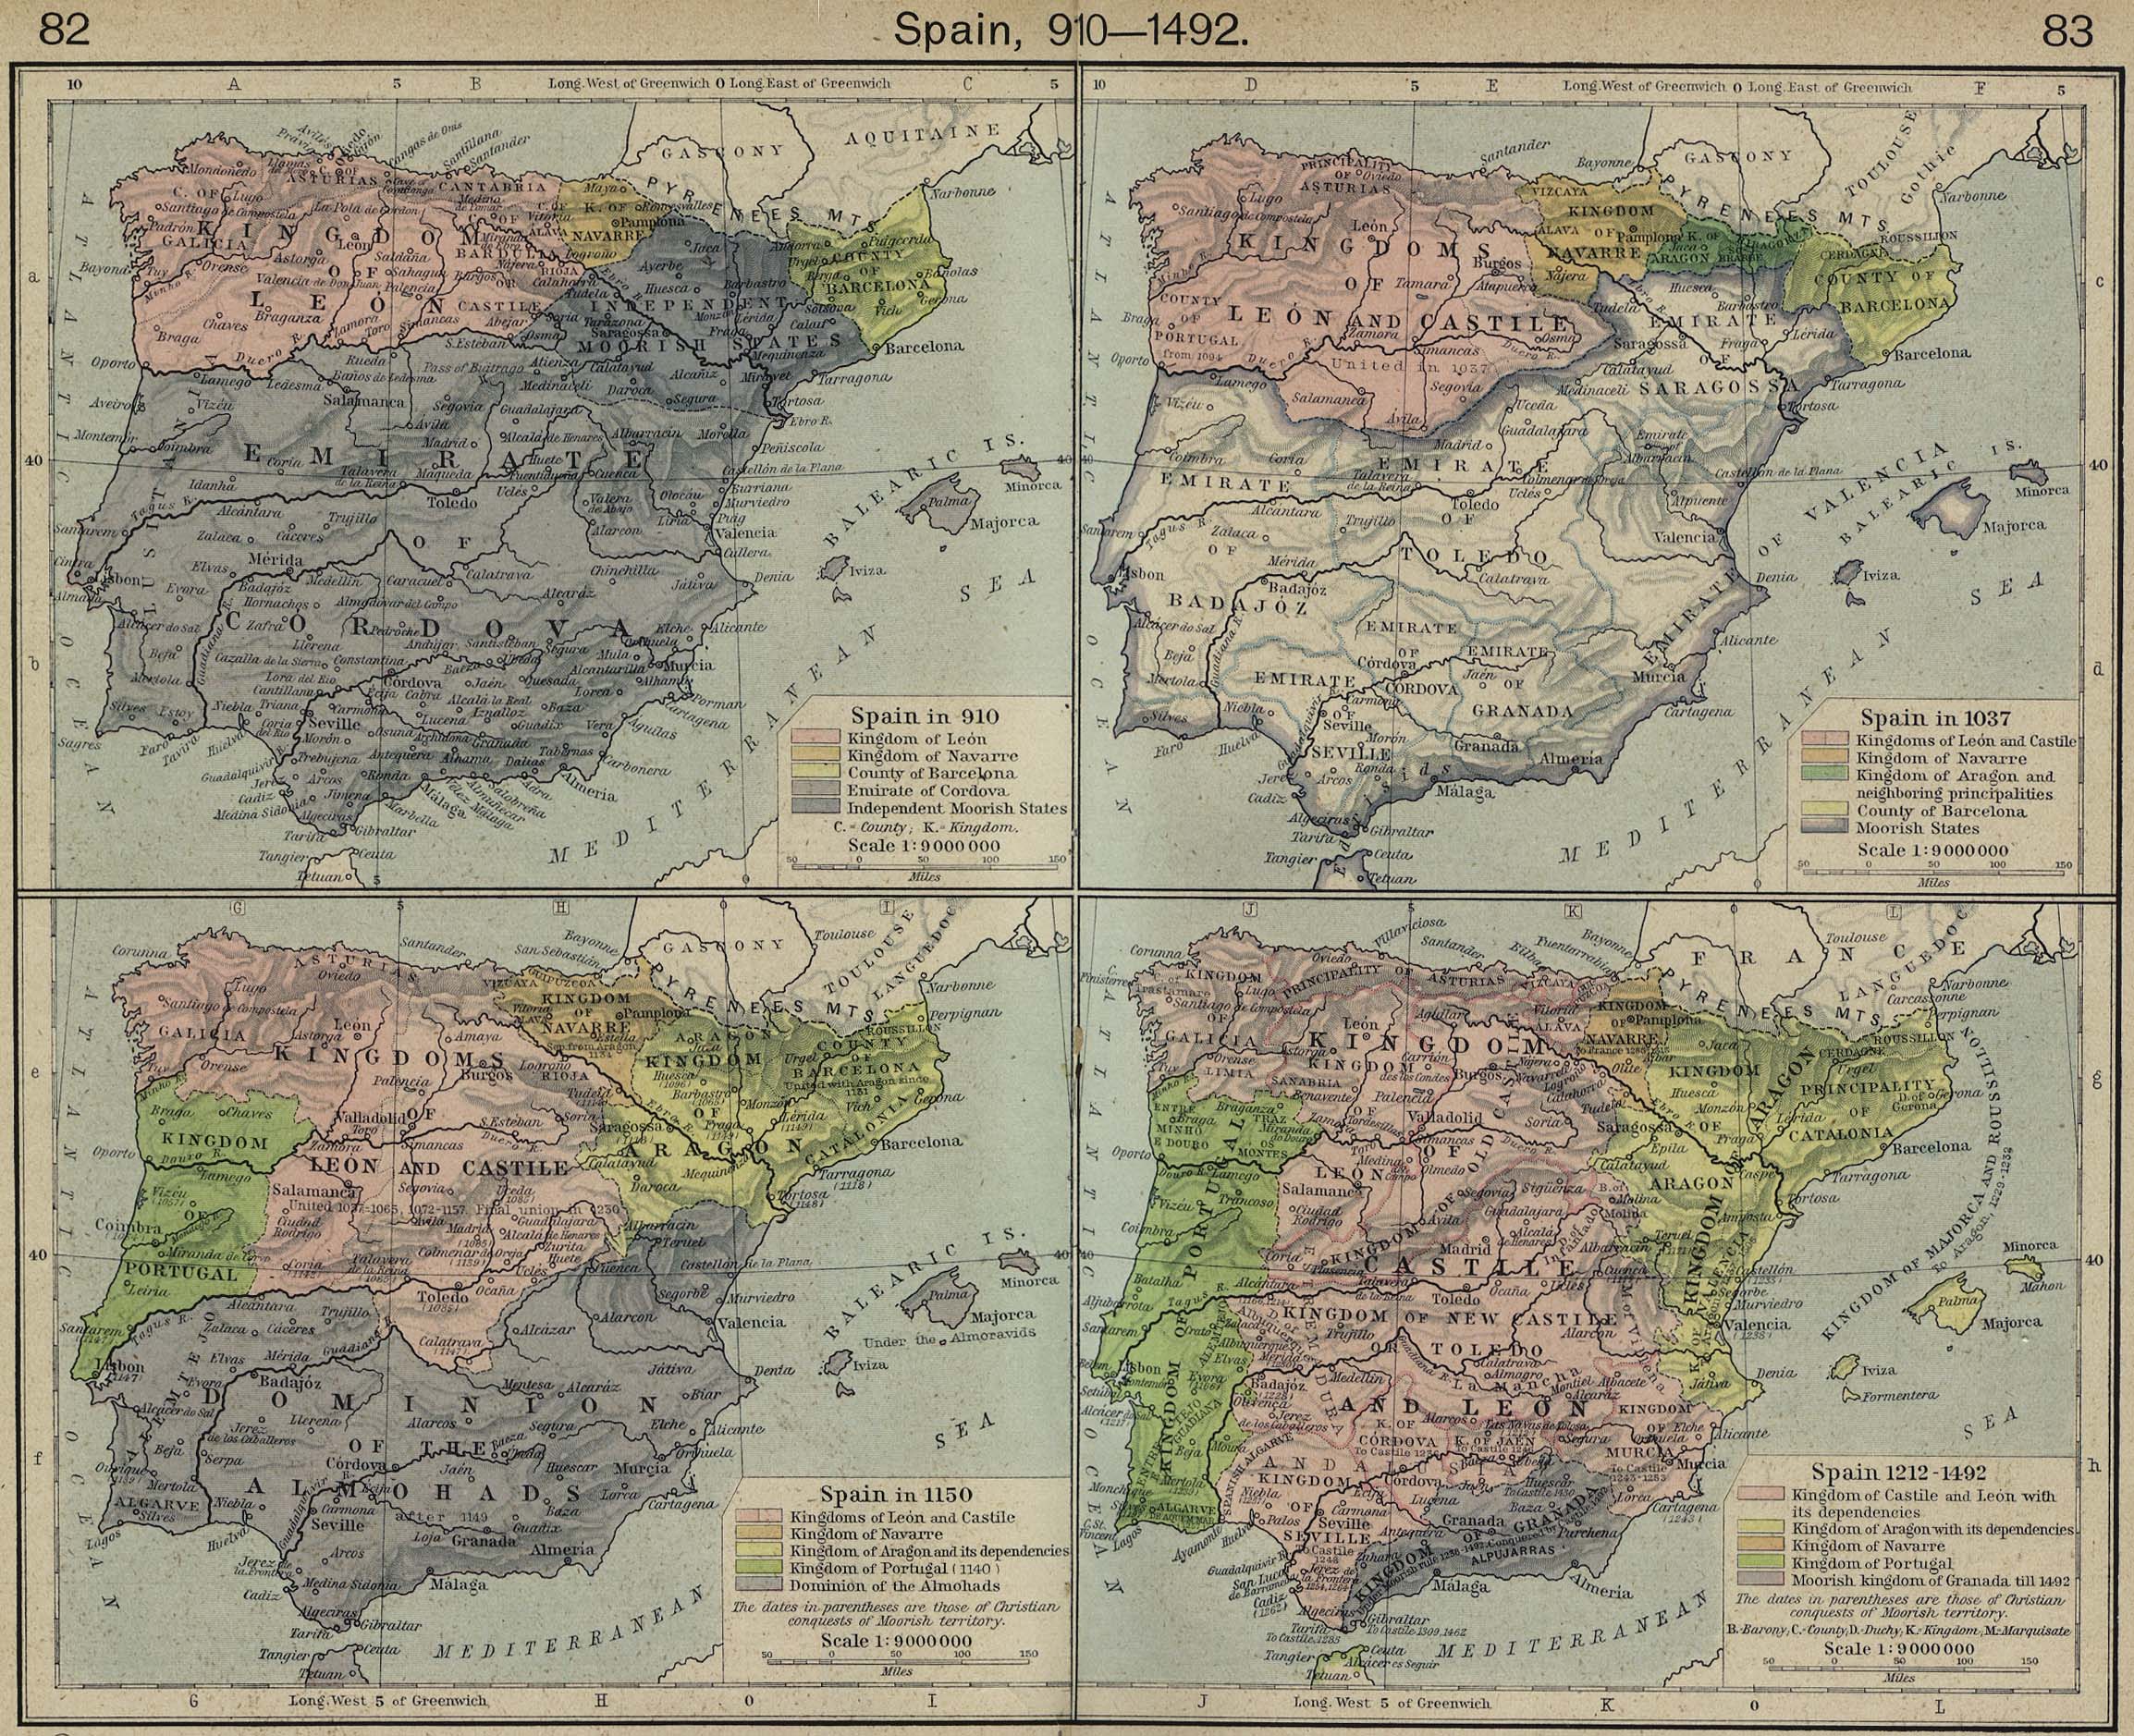 Maps of Spain 910-1492